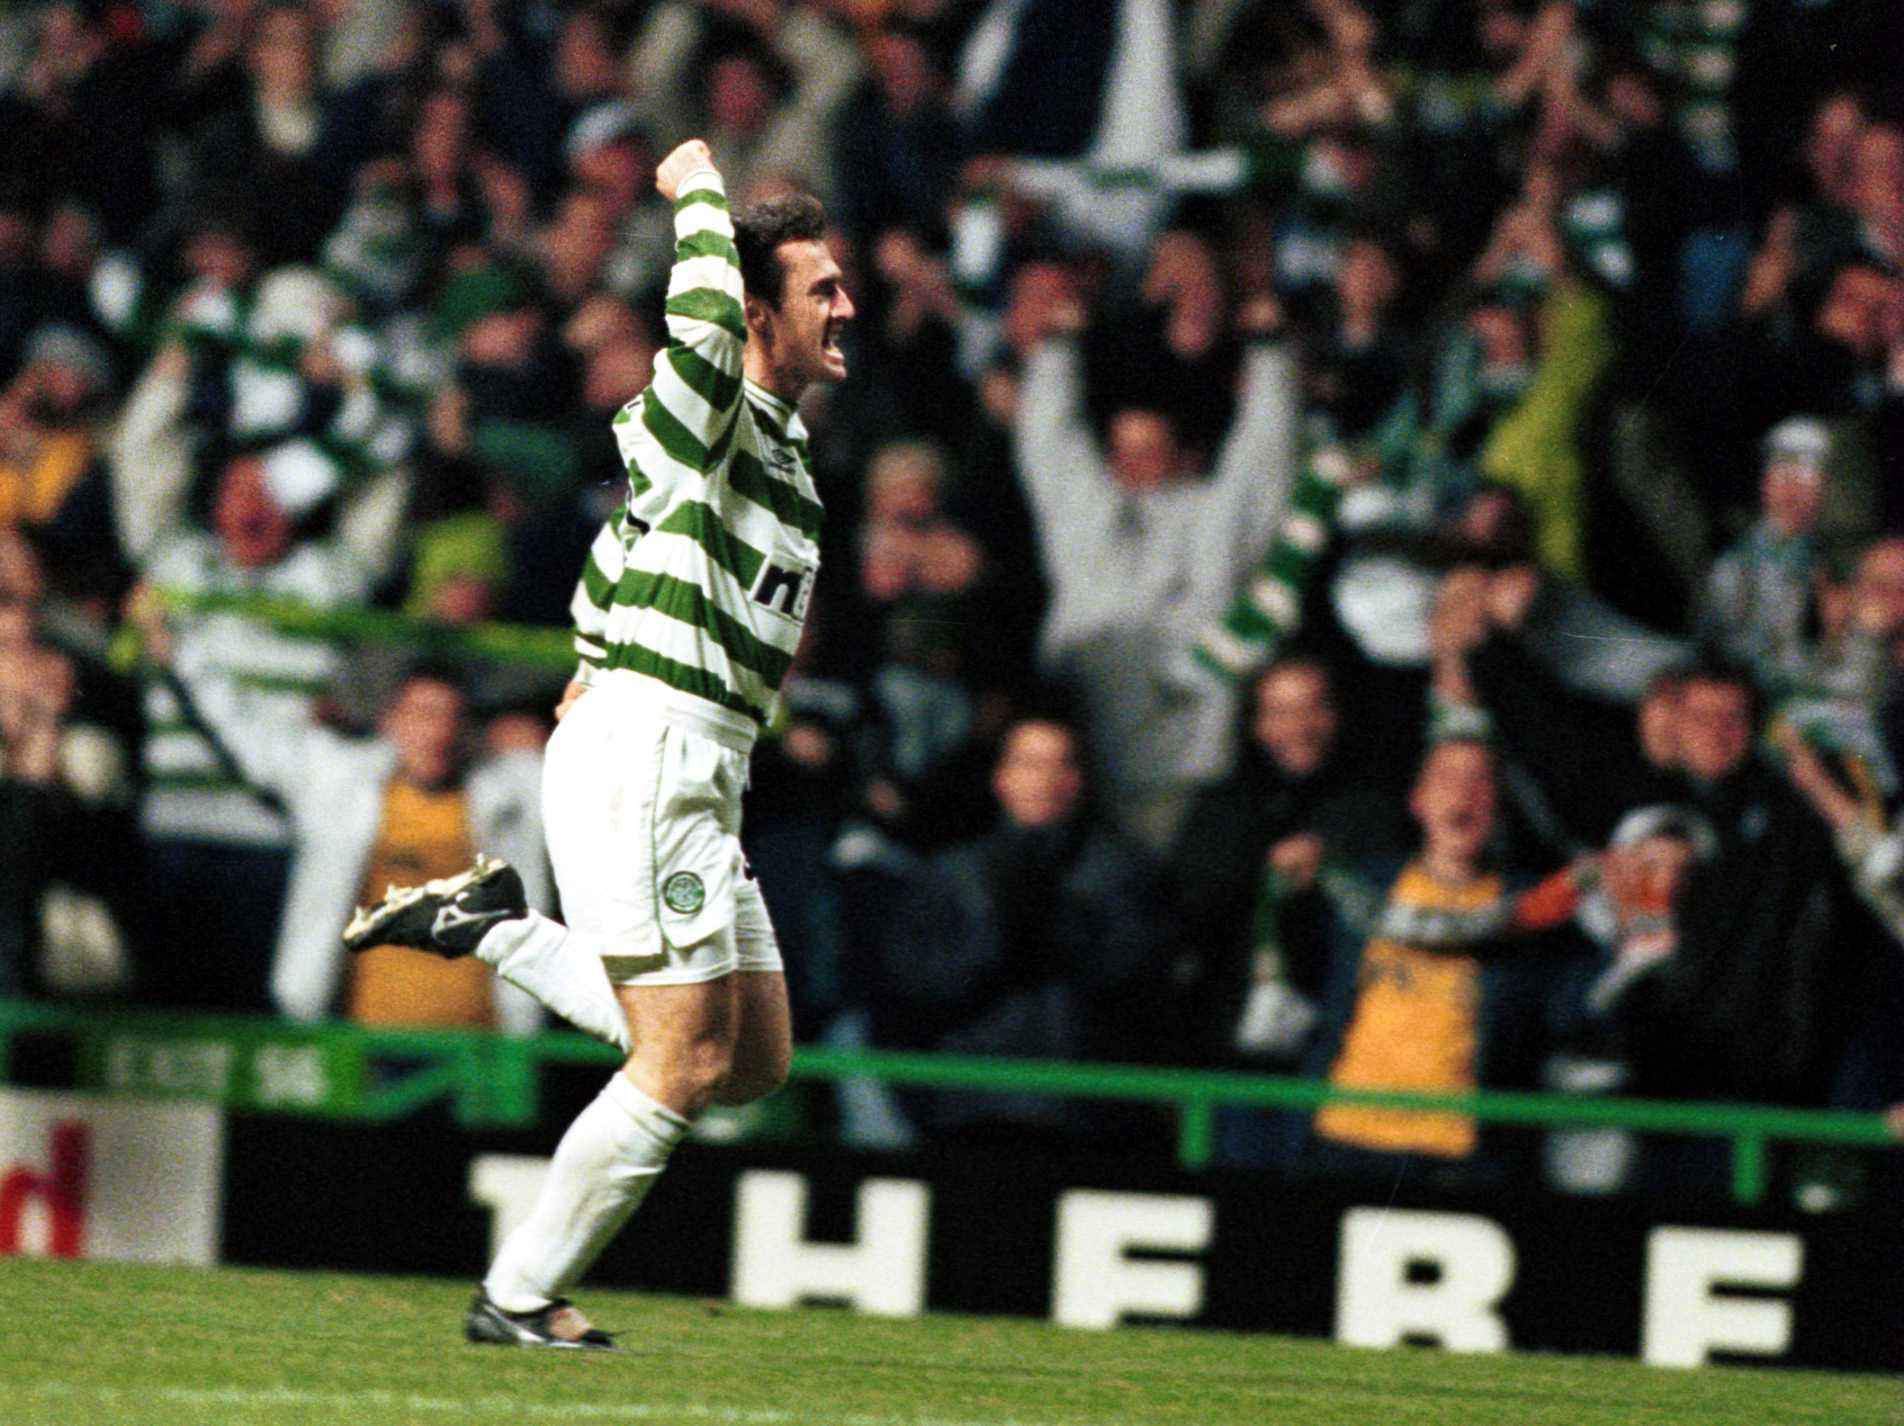 Hugh Keevins revisits terrible Celtic transfer comment; Lubo Moravcik sends him birthday gift